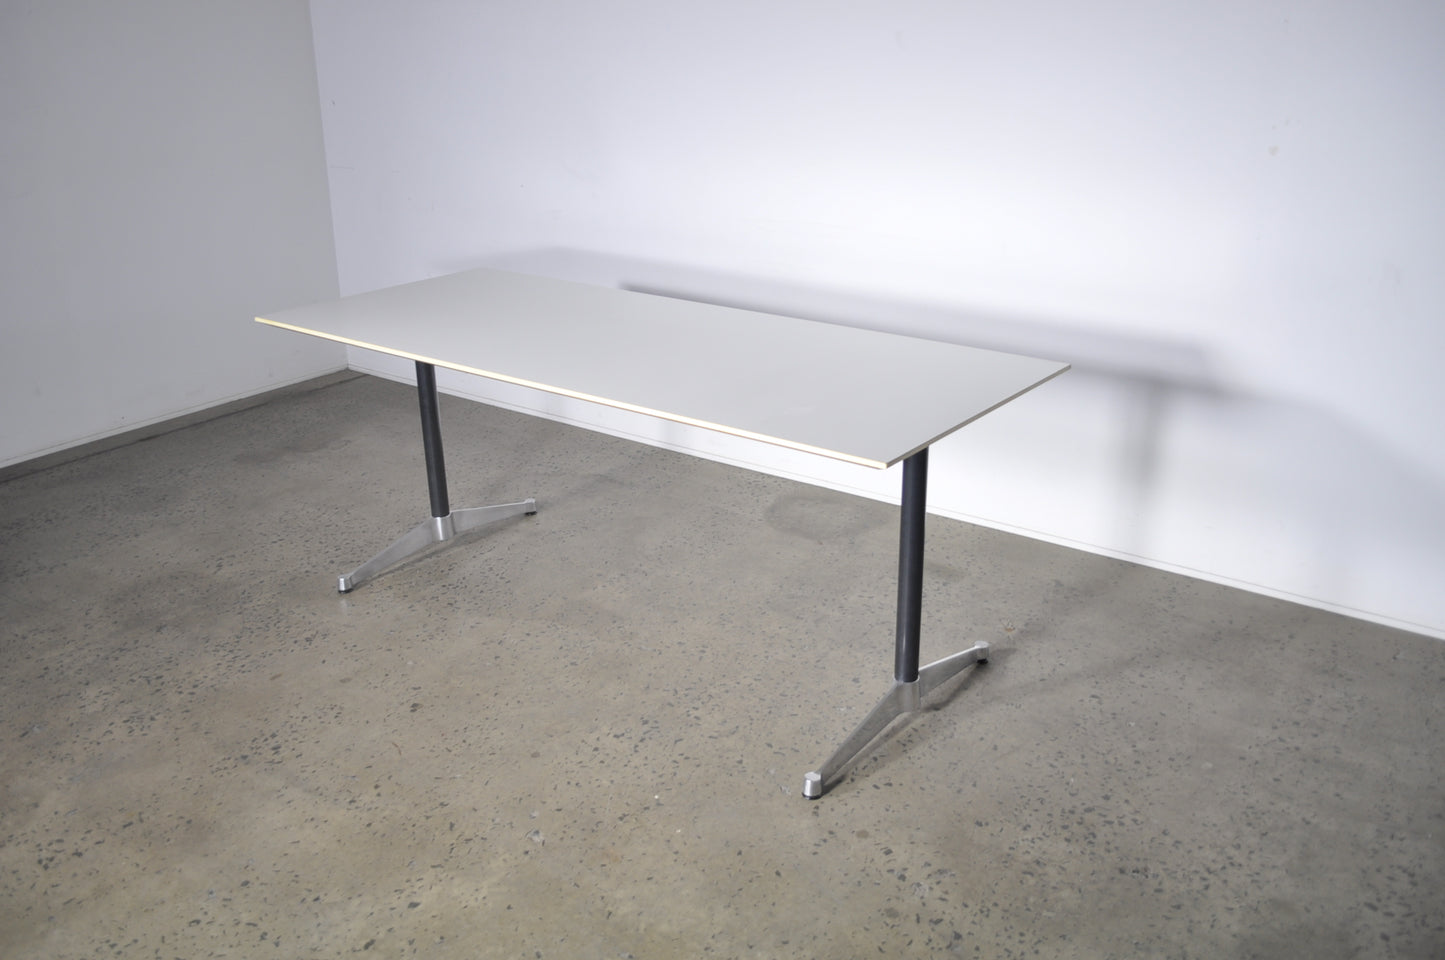 Vitra Table by Eames.